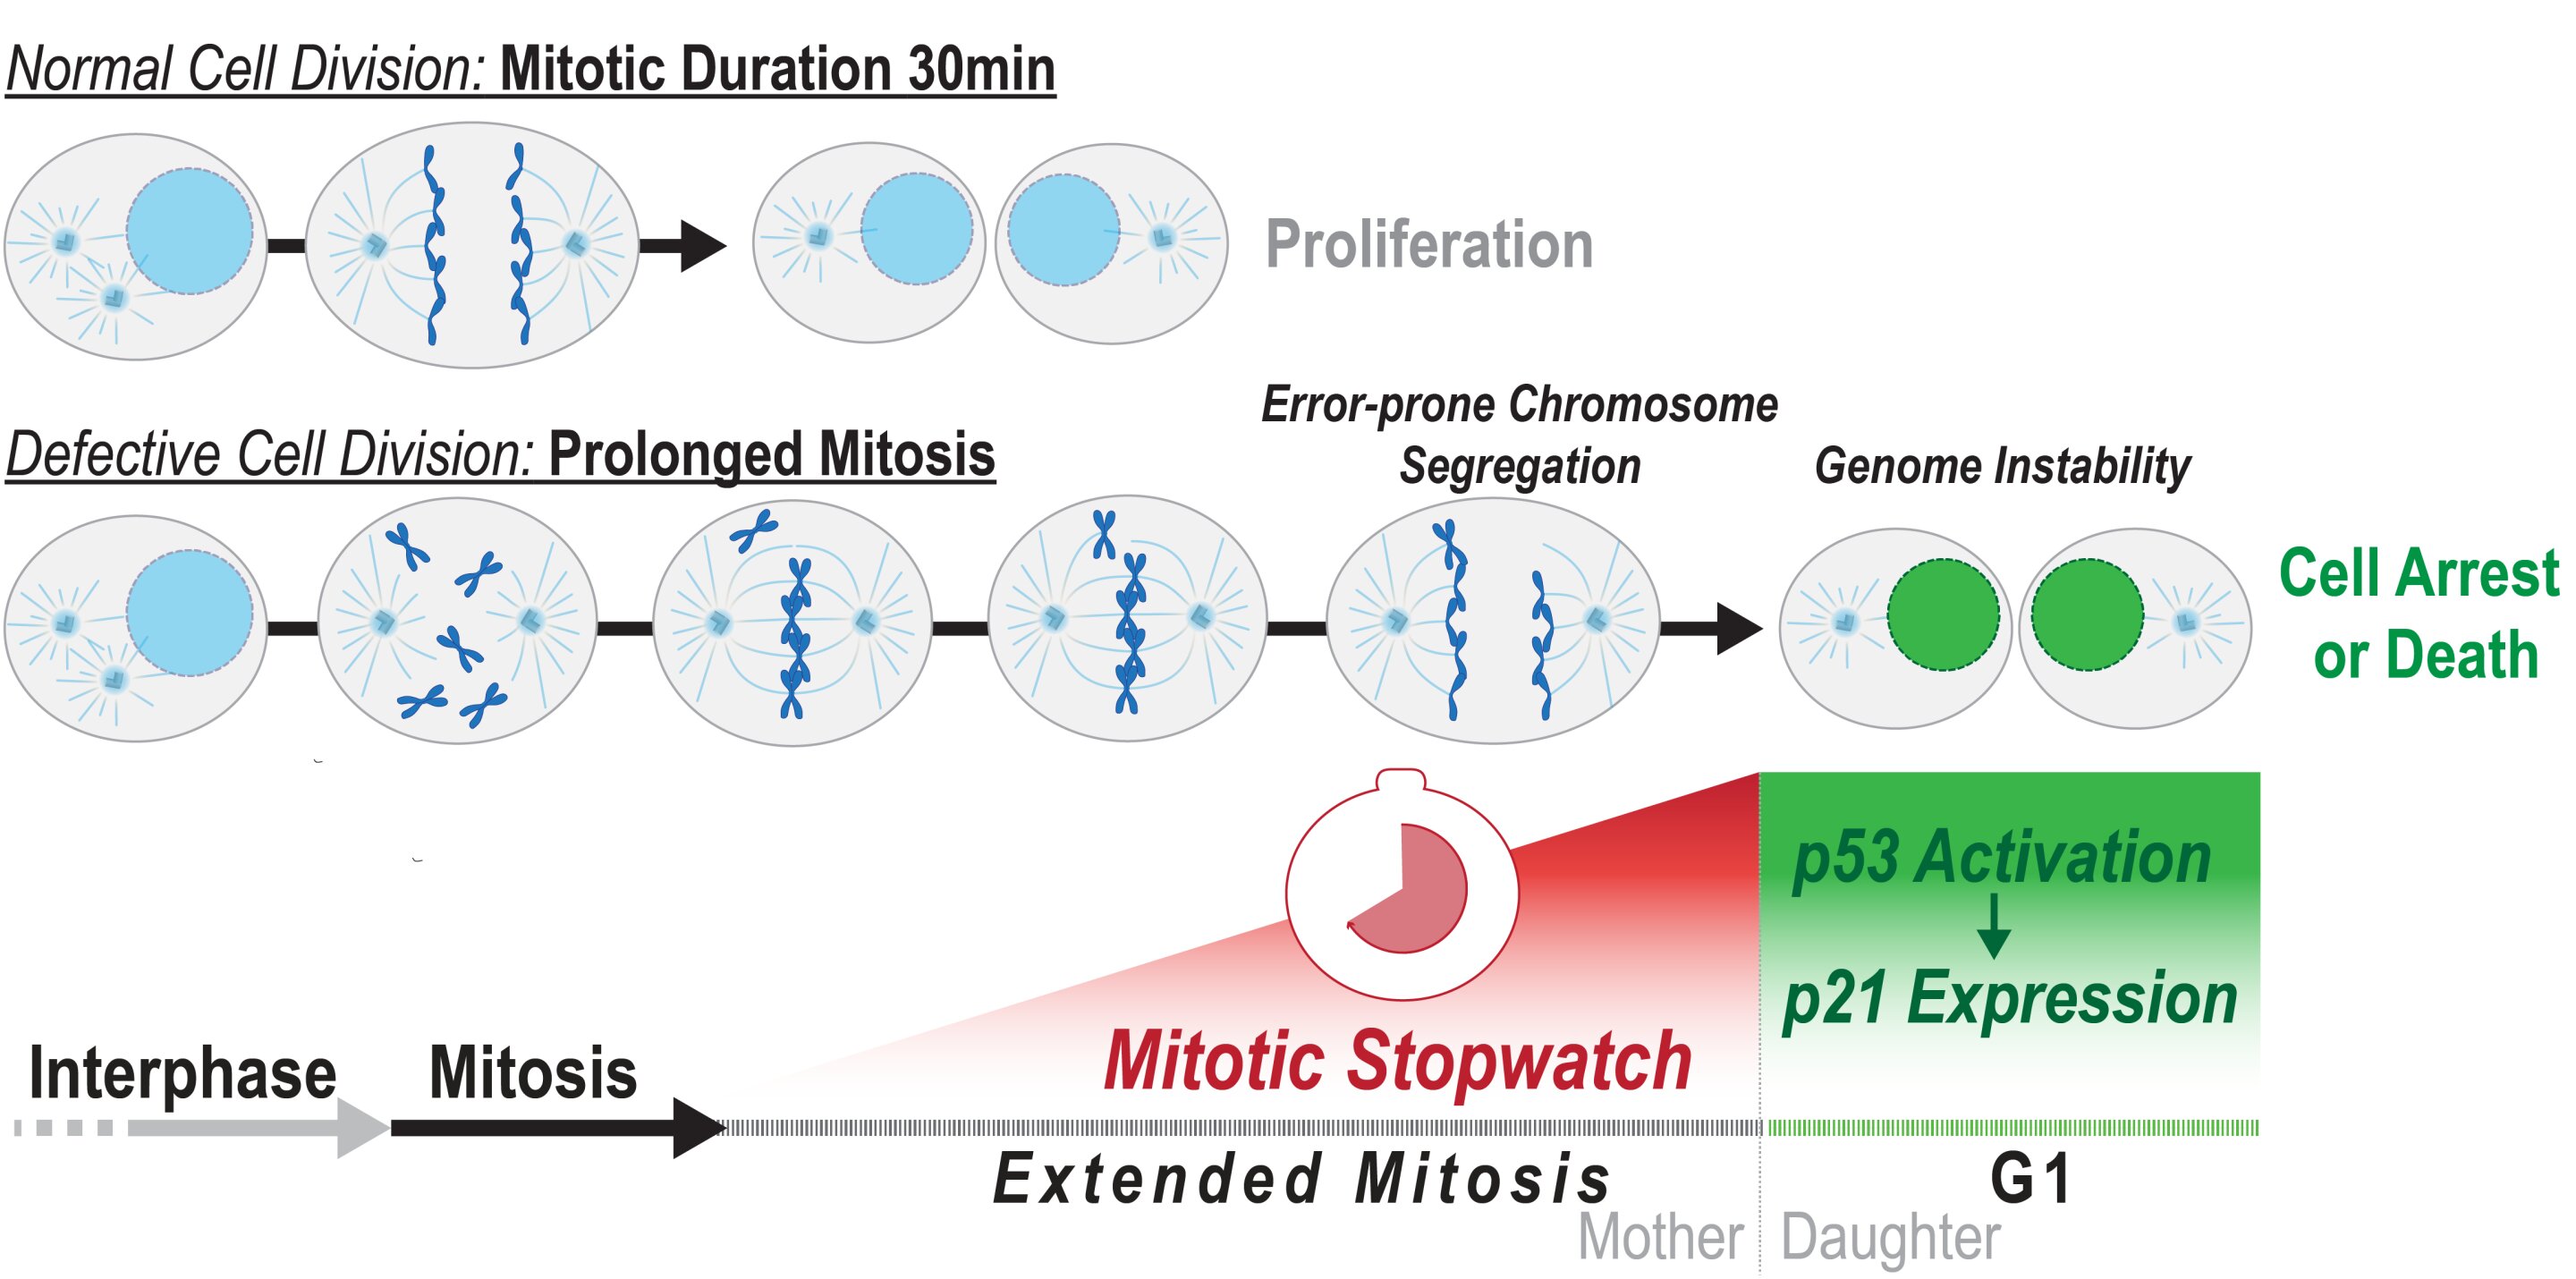 photo of Memories of mitosis: Molecular mechanism that detects defects during cell division could aid cancer treatment image